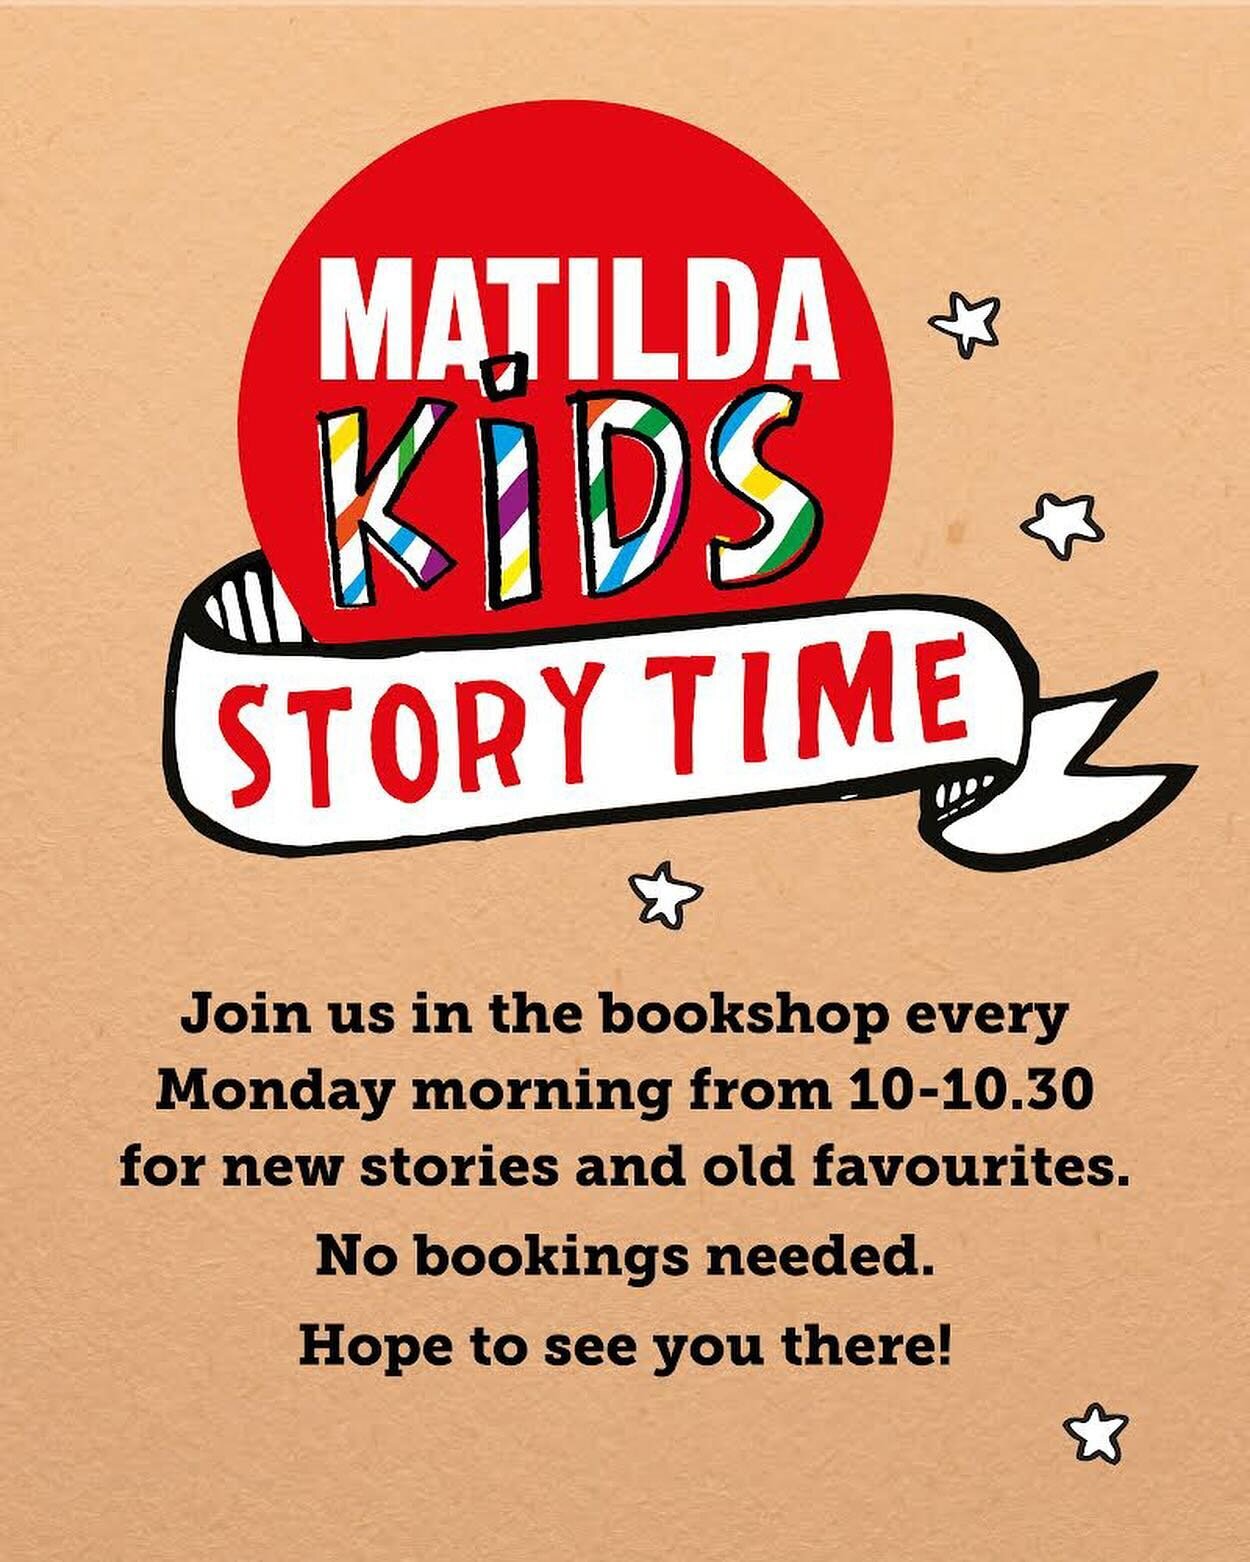 ✨📚 Calling all story lovers 📚✨

Story time returns to the bookshop this week! Join us at 10am on Mondays to hear new stories and old favourites.

I wonder what our friends have decided to read this week?